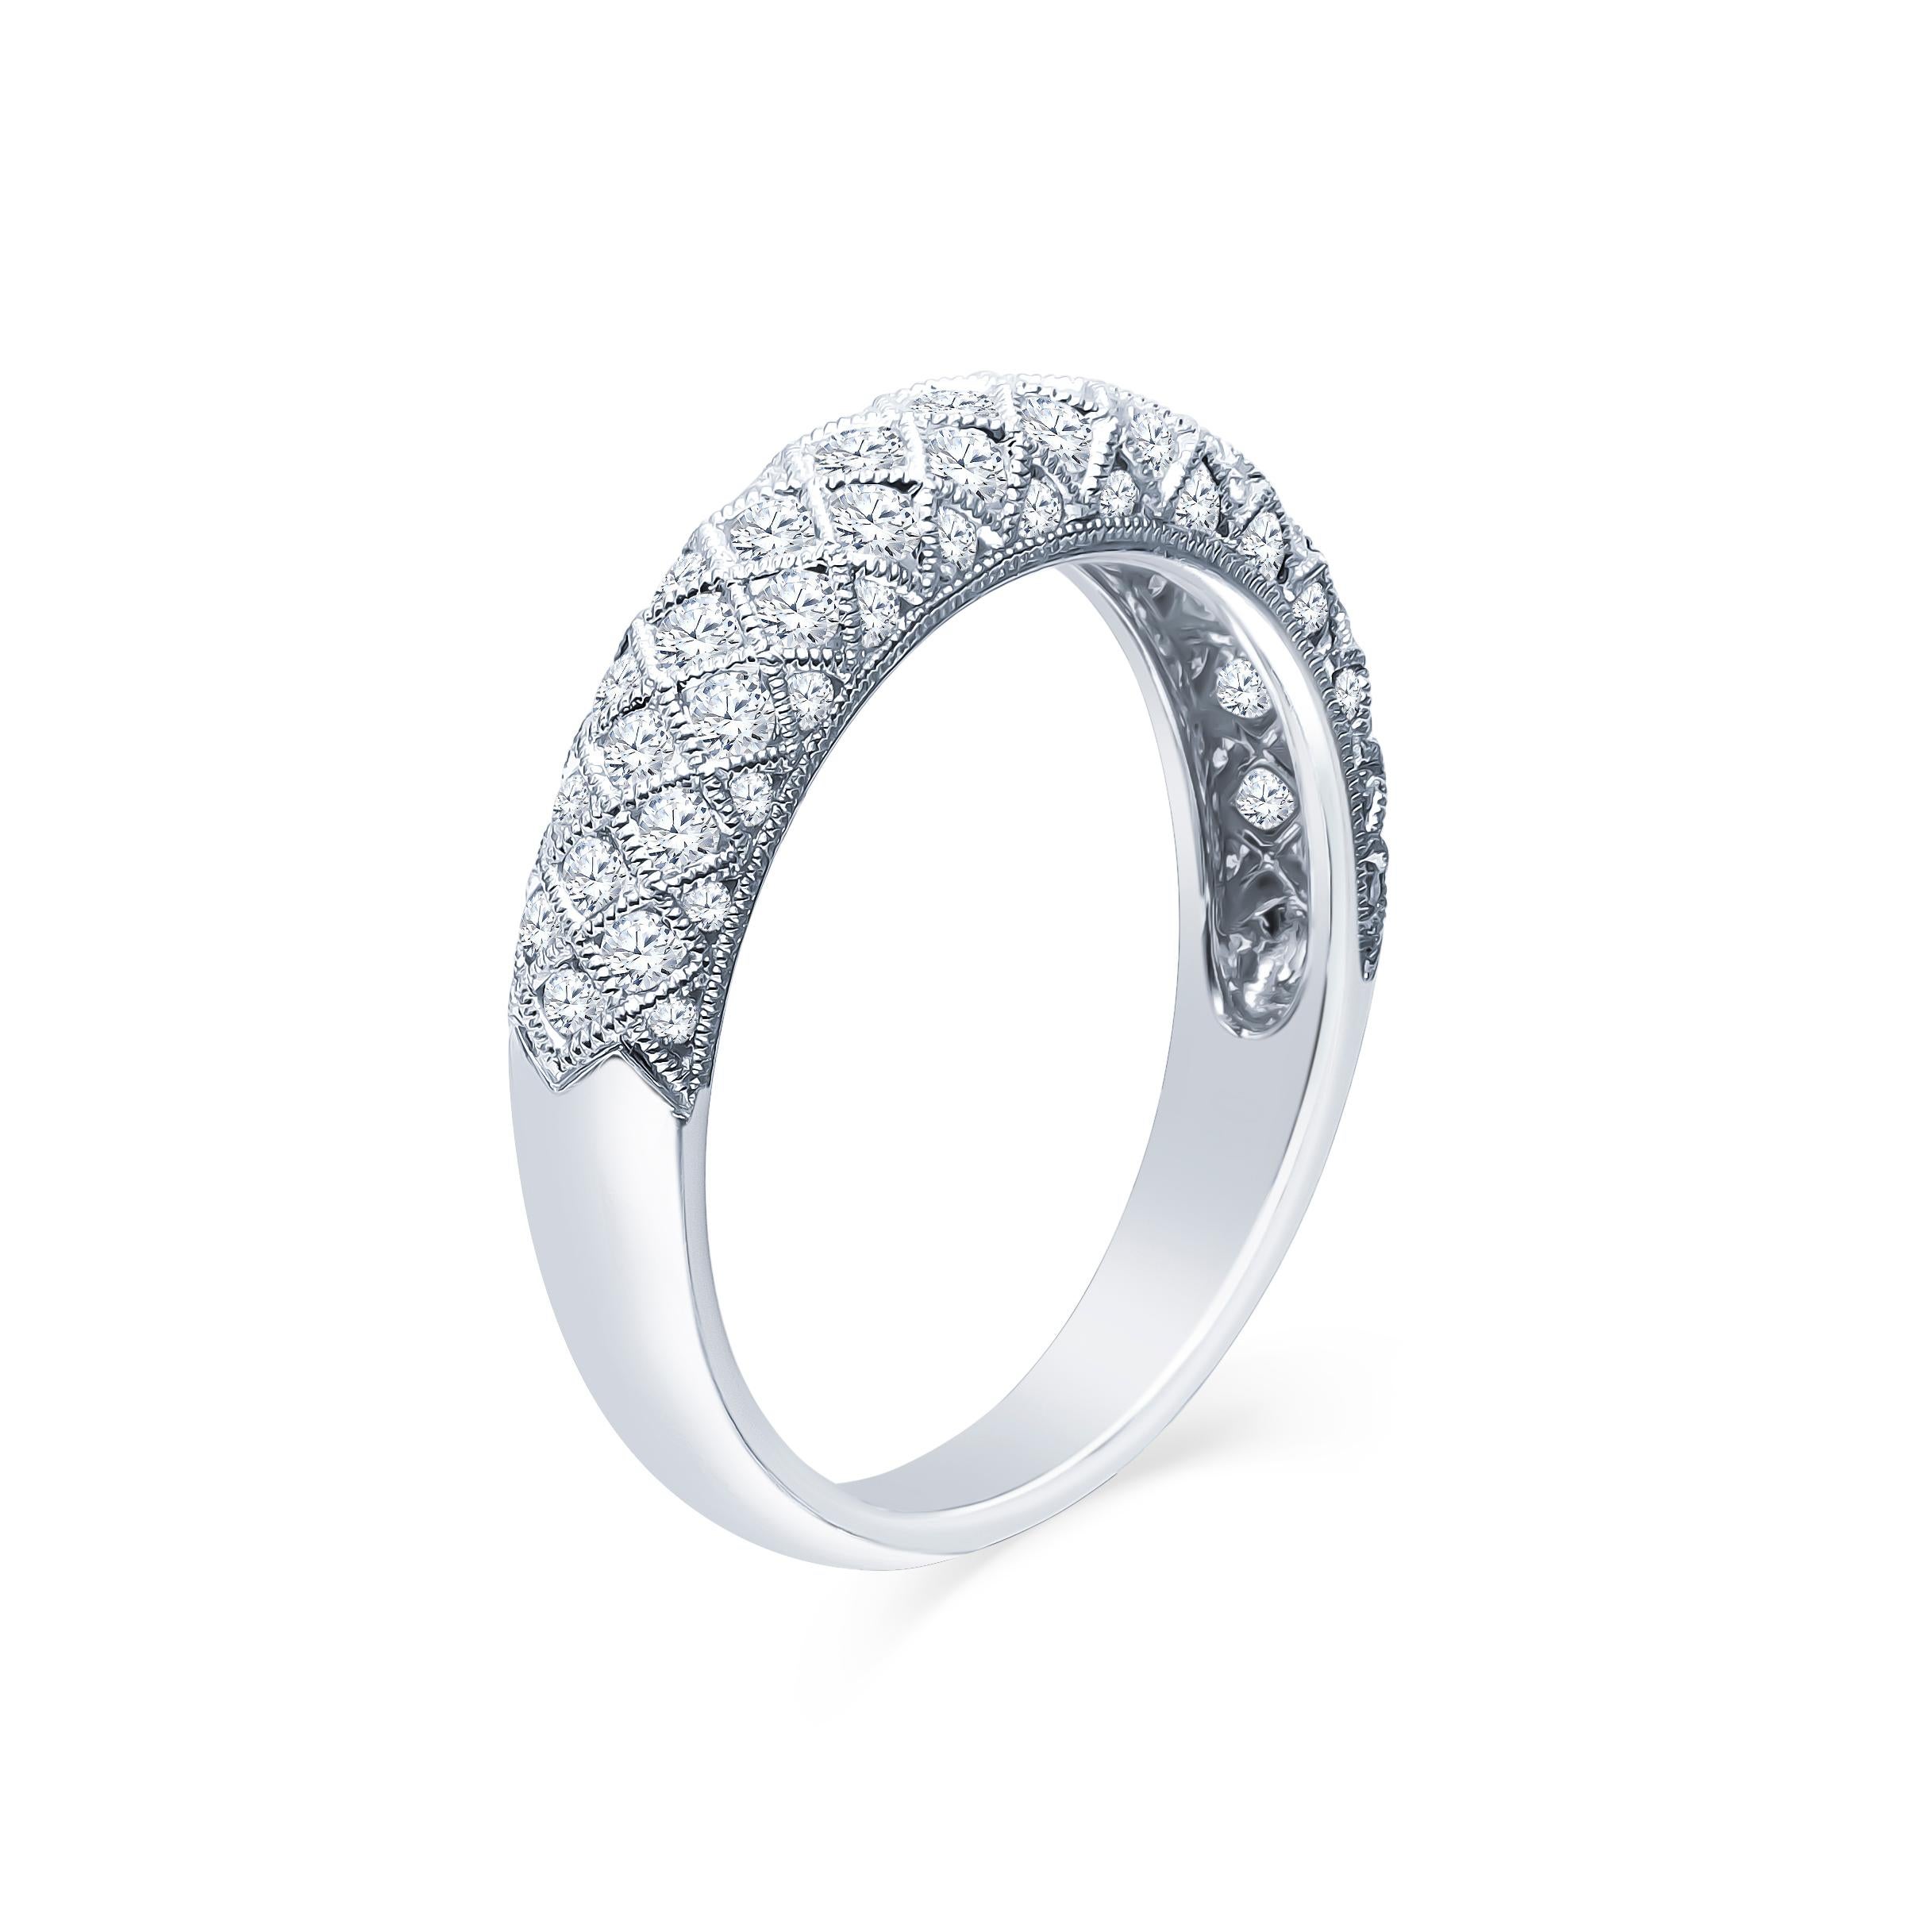 This intricately detailed women's 18K white gold band features four-side channel set white round diamonds with a combined weight of approximately 0.80 carats. The ring stands alone beautifully but would also be stunning stacked with narrow diamond